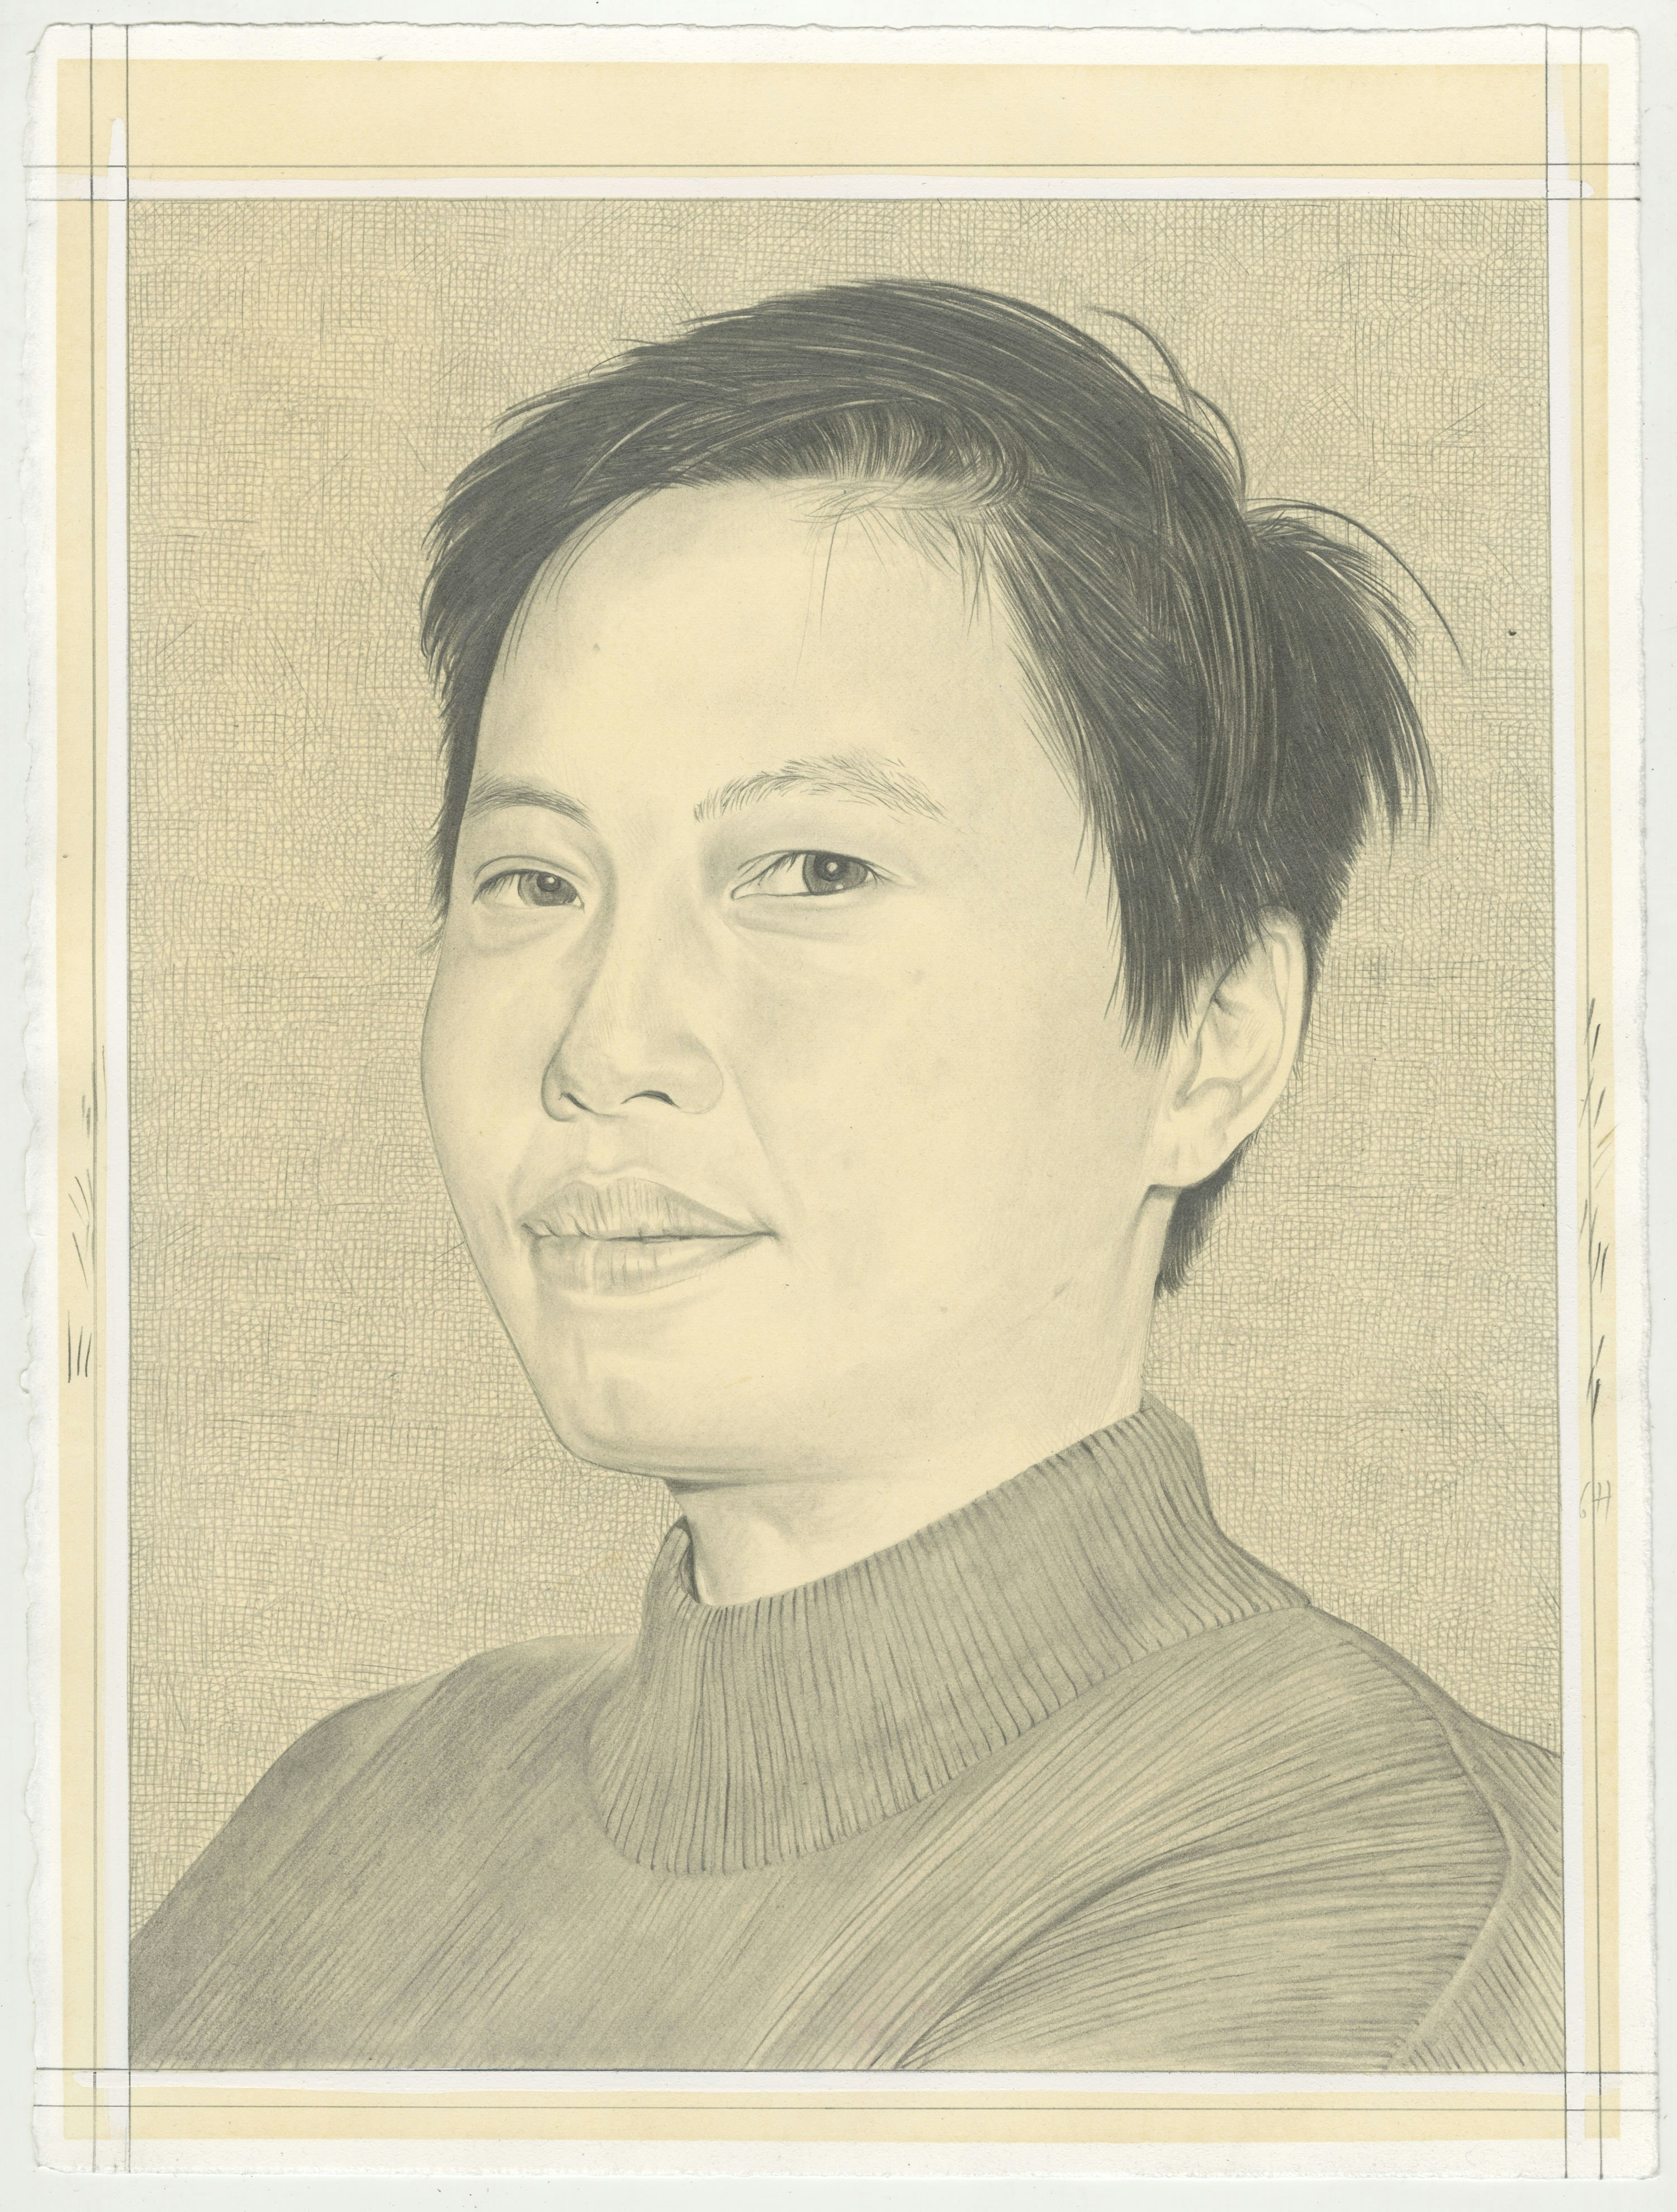 Portrait of Jessamine Batario, pencil on paper by Phong H. Bui.